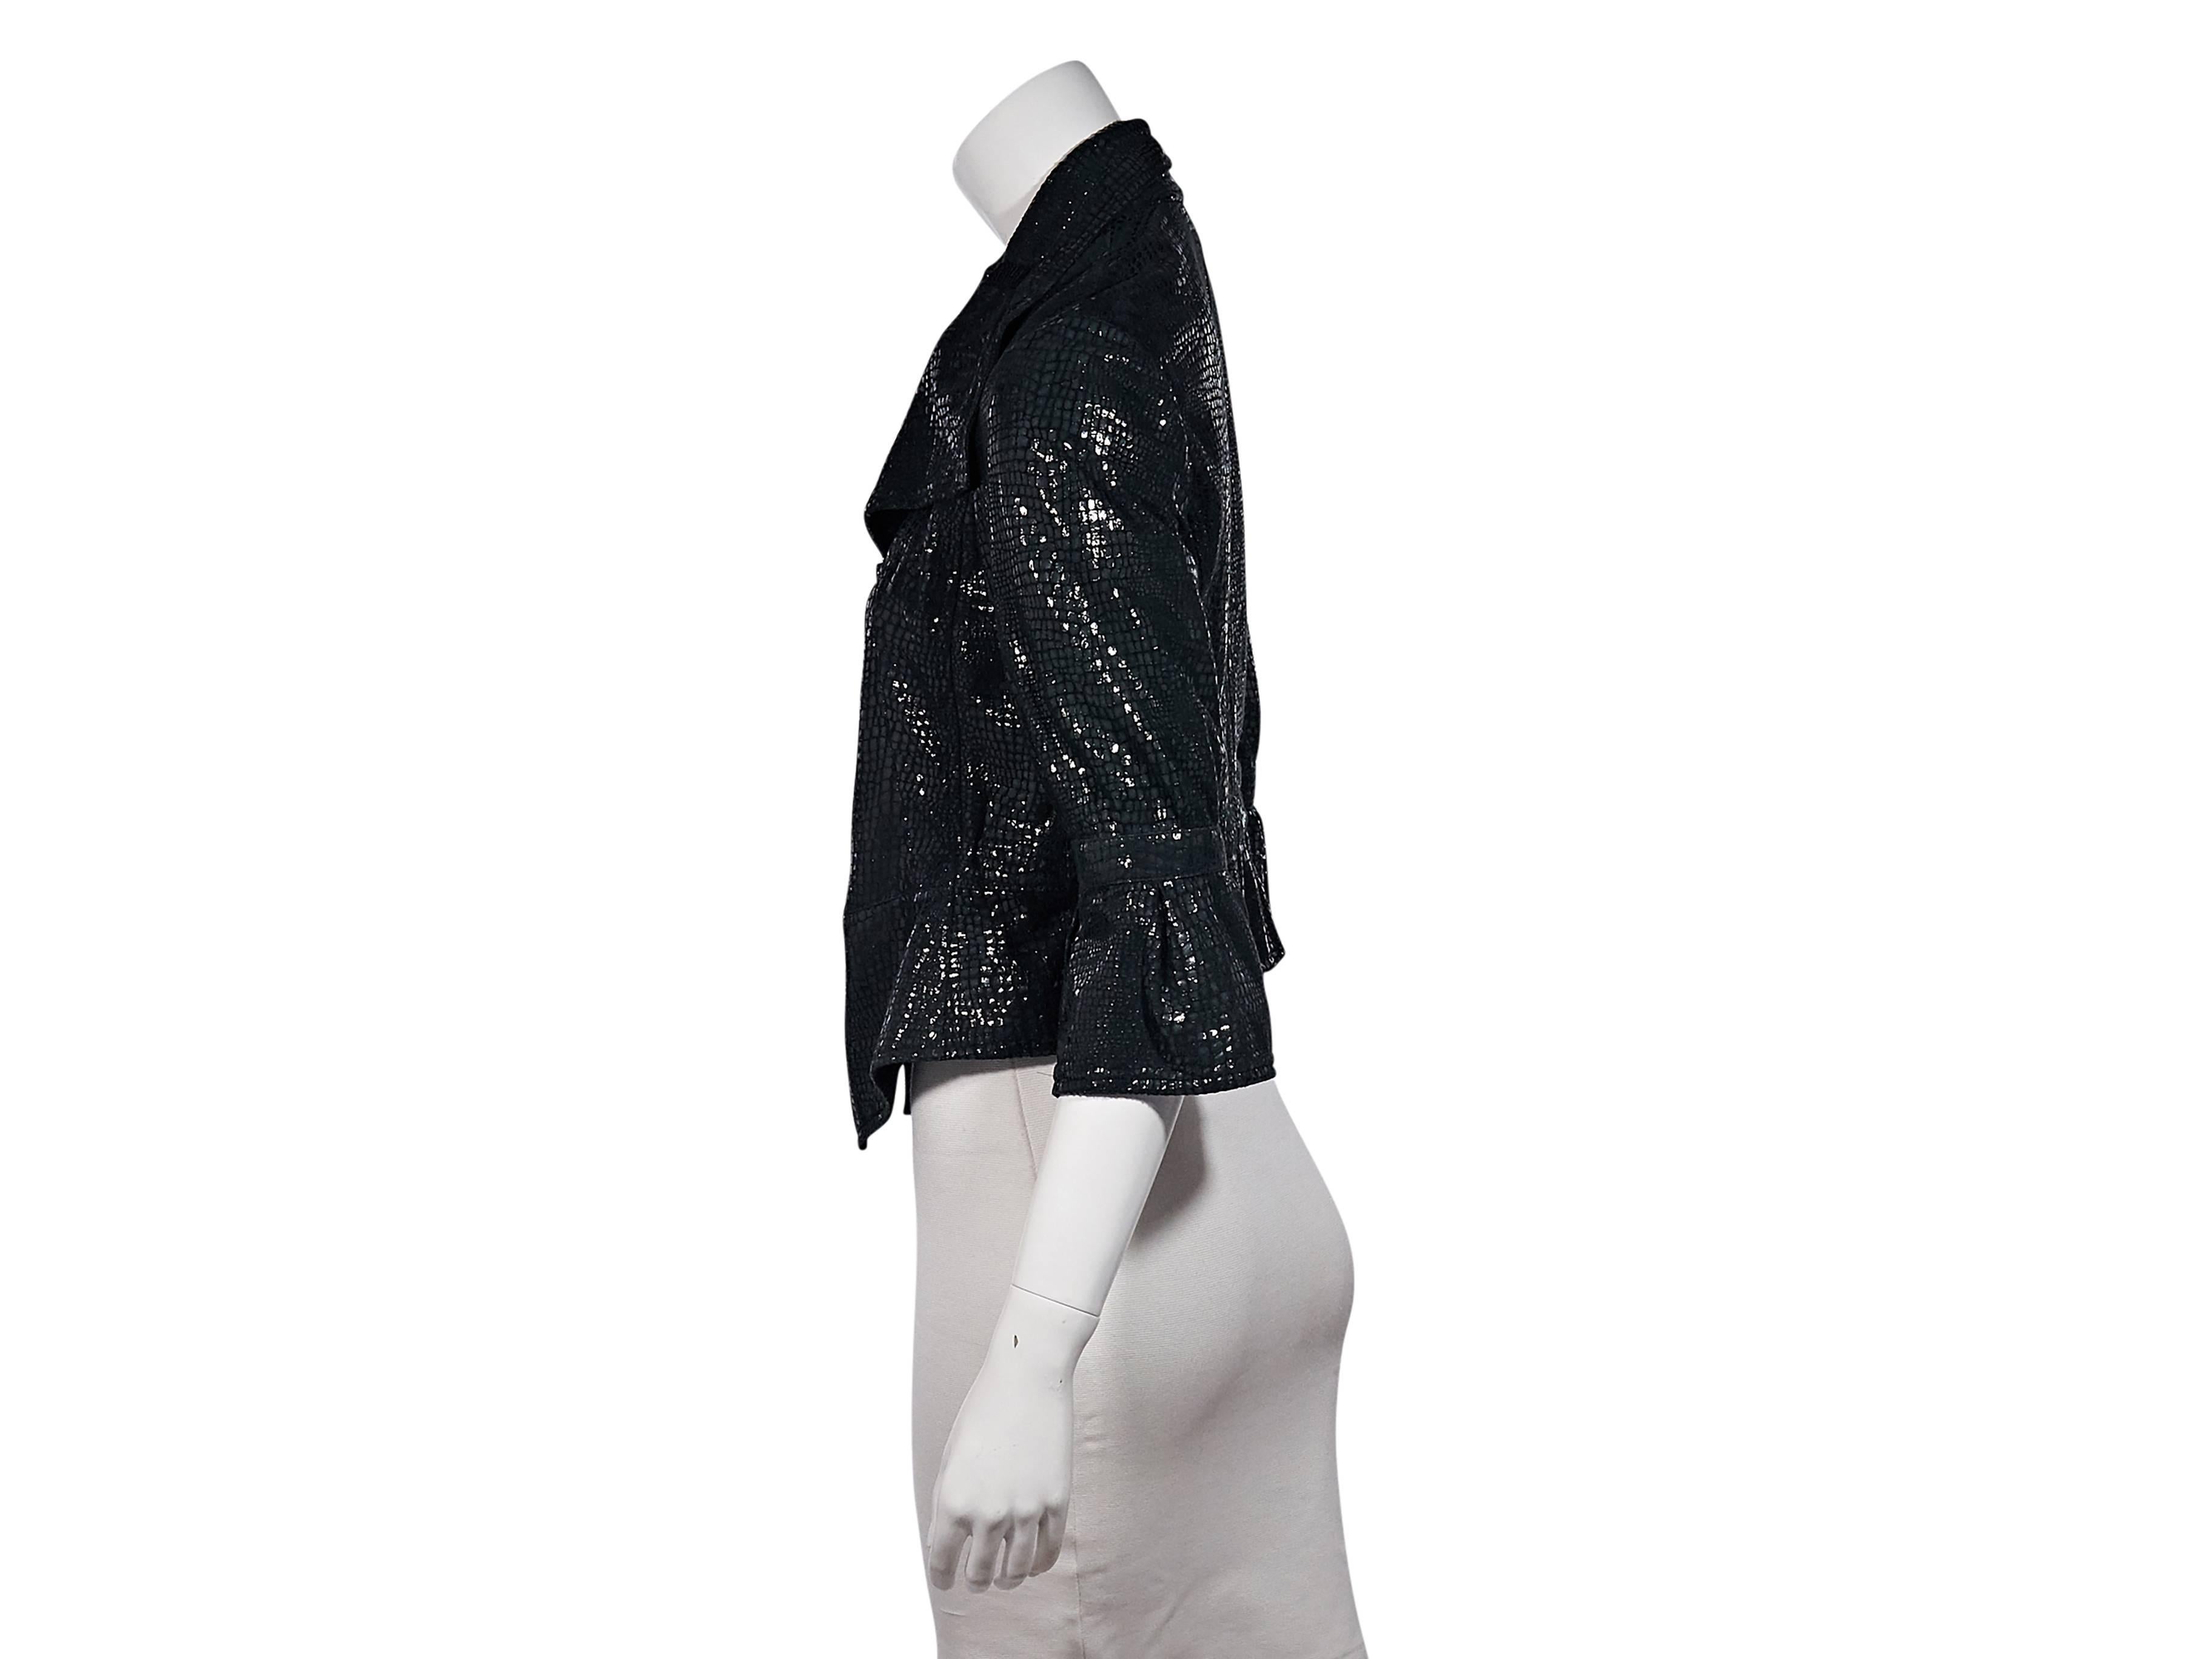 Product details: Black reptile-printed leather jacket by Armani Collezioni. Features a shine finish. Elbow-length sleeves. Bell cuffs. Asymmetrical zip-front closure. Label size IT38.
Condition: Excellent. 